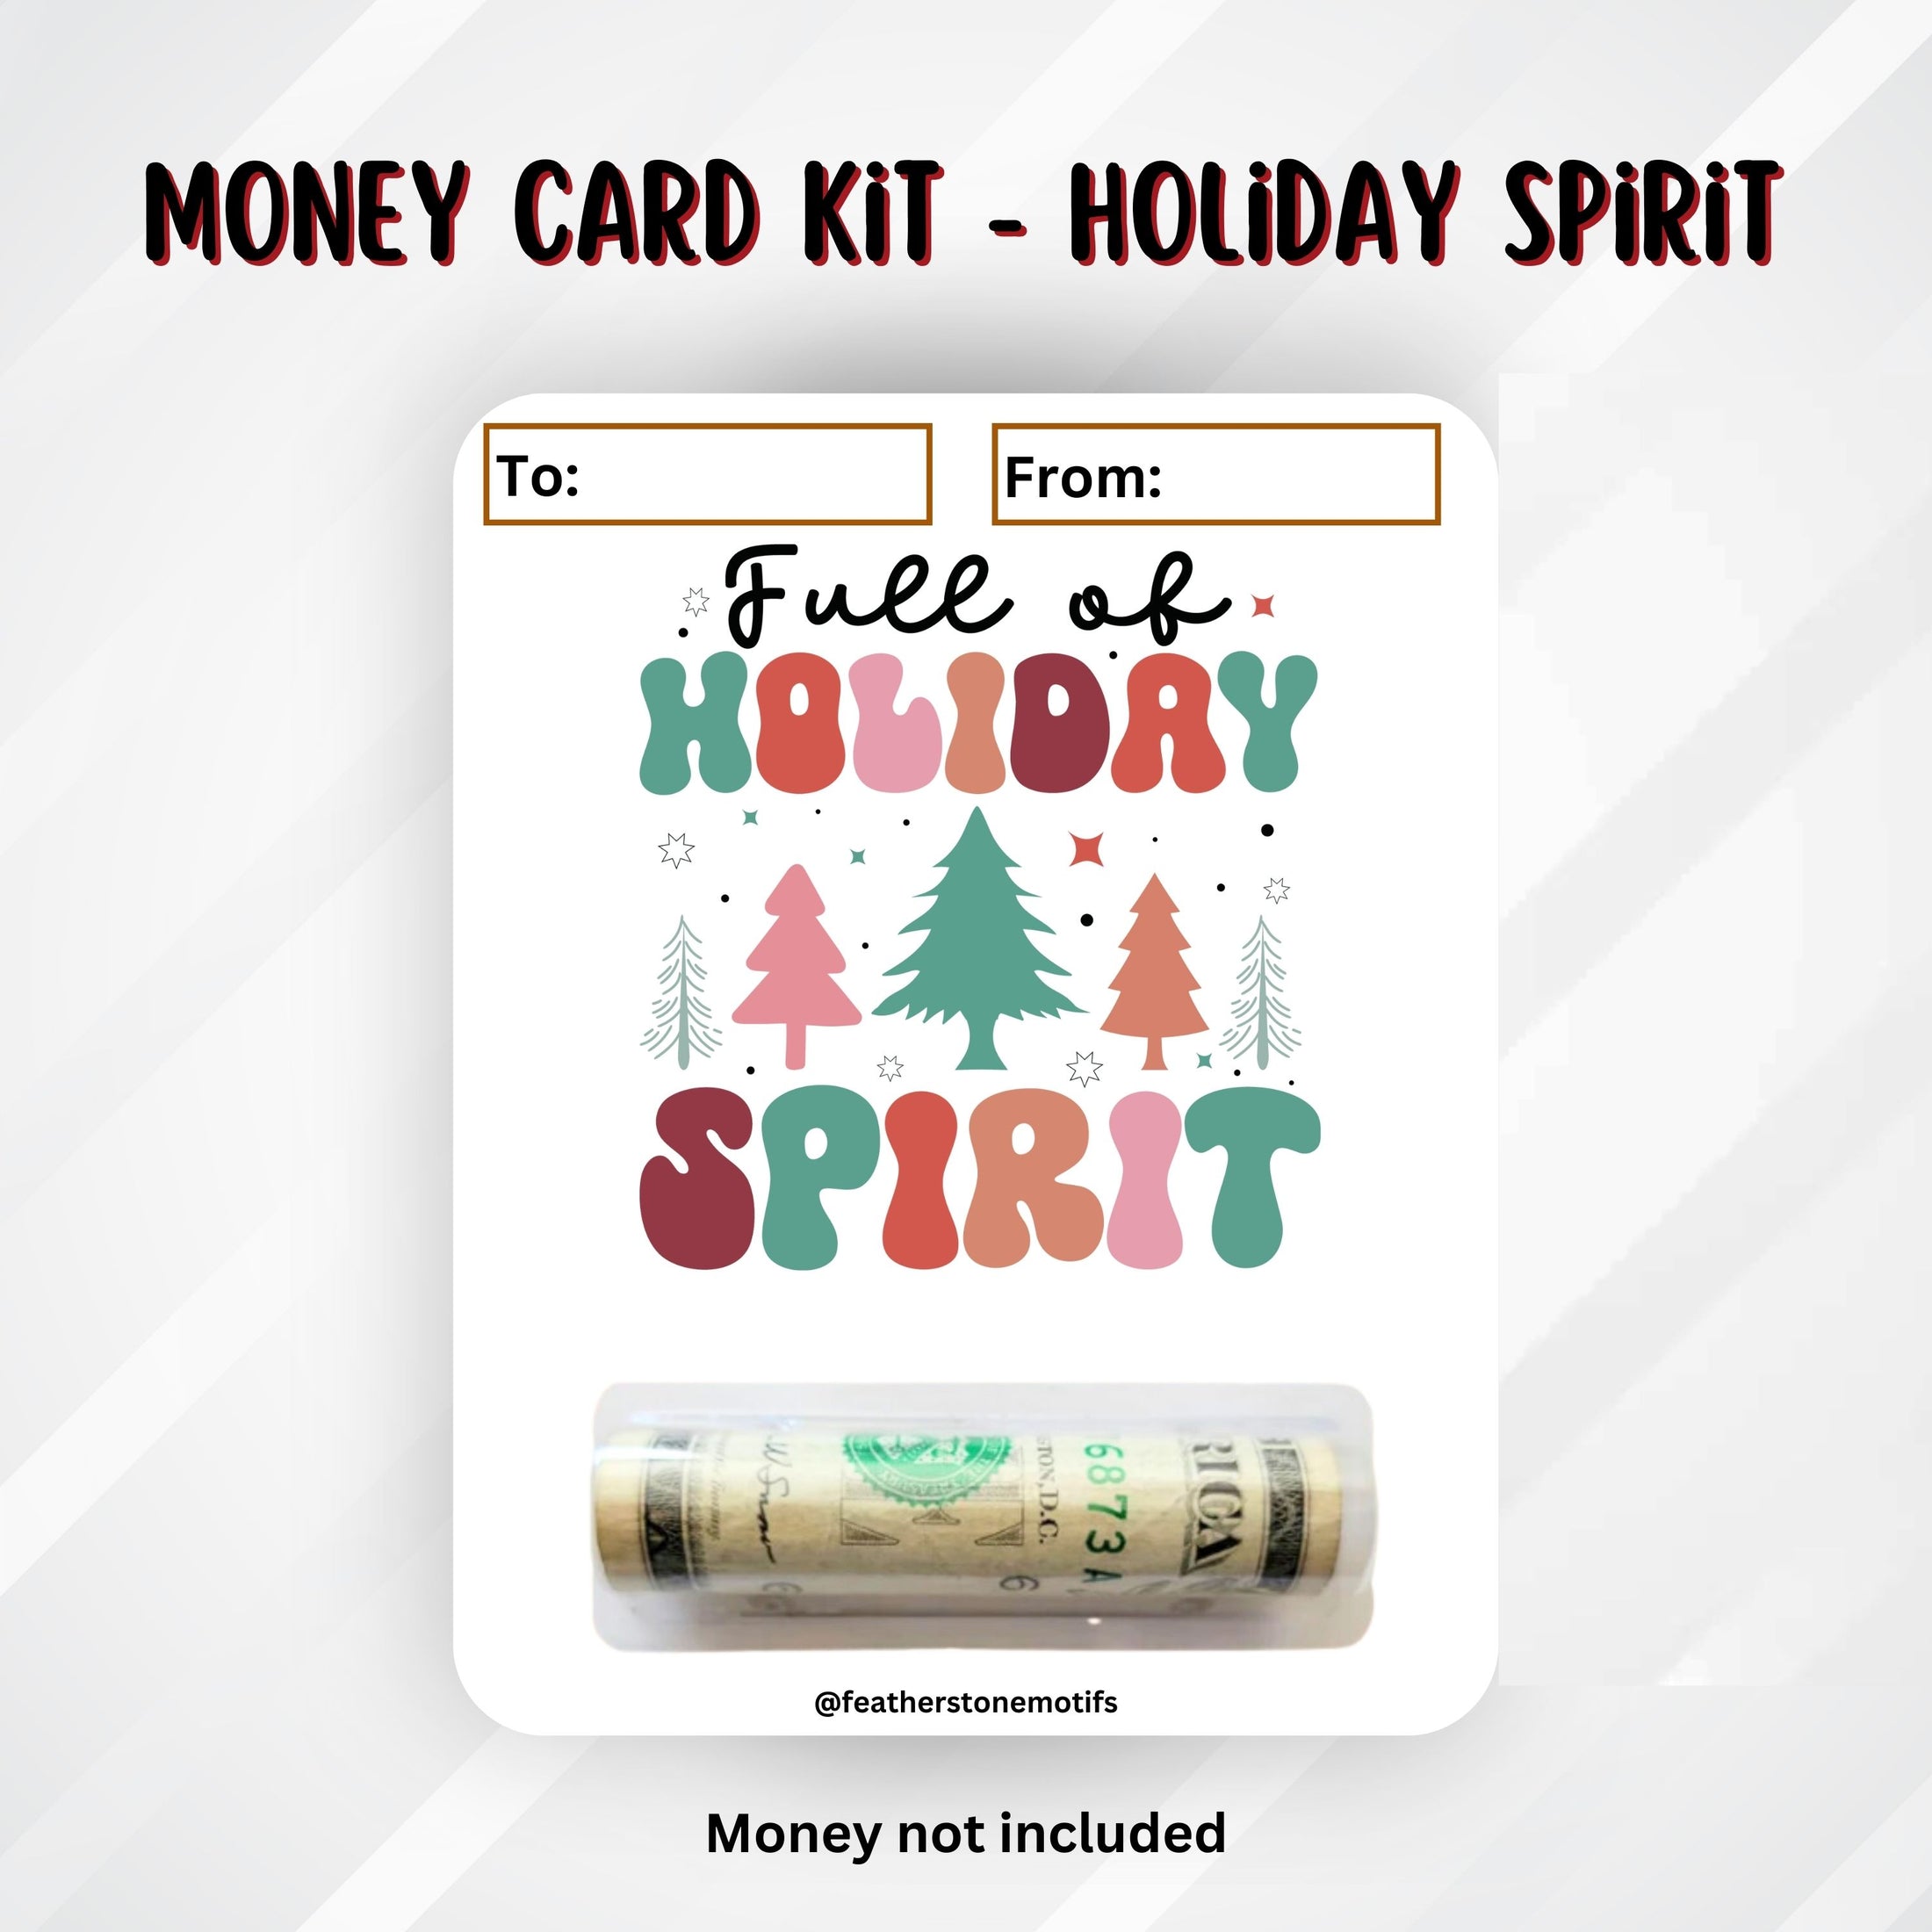 This image show the money tube attached to the Holiday Spirit money card.